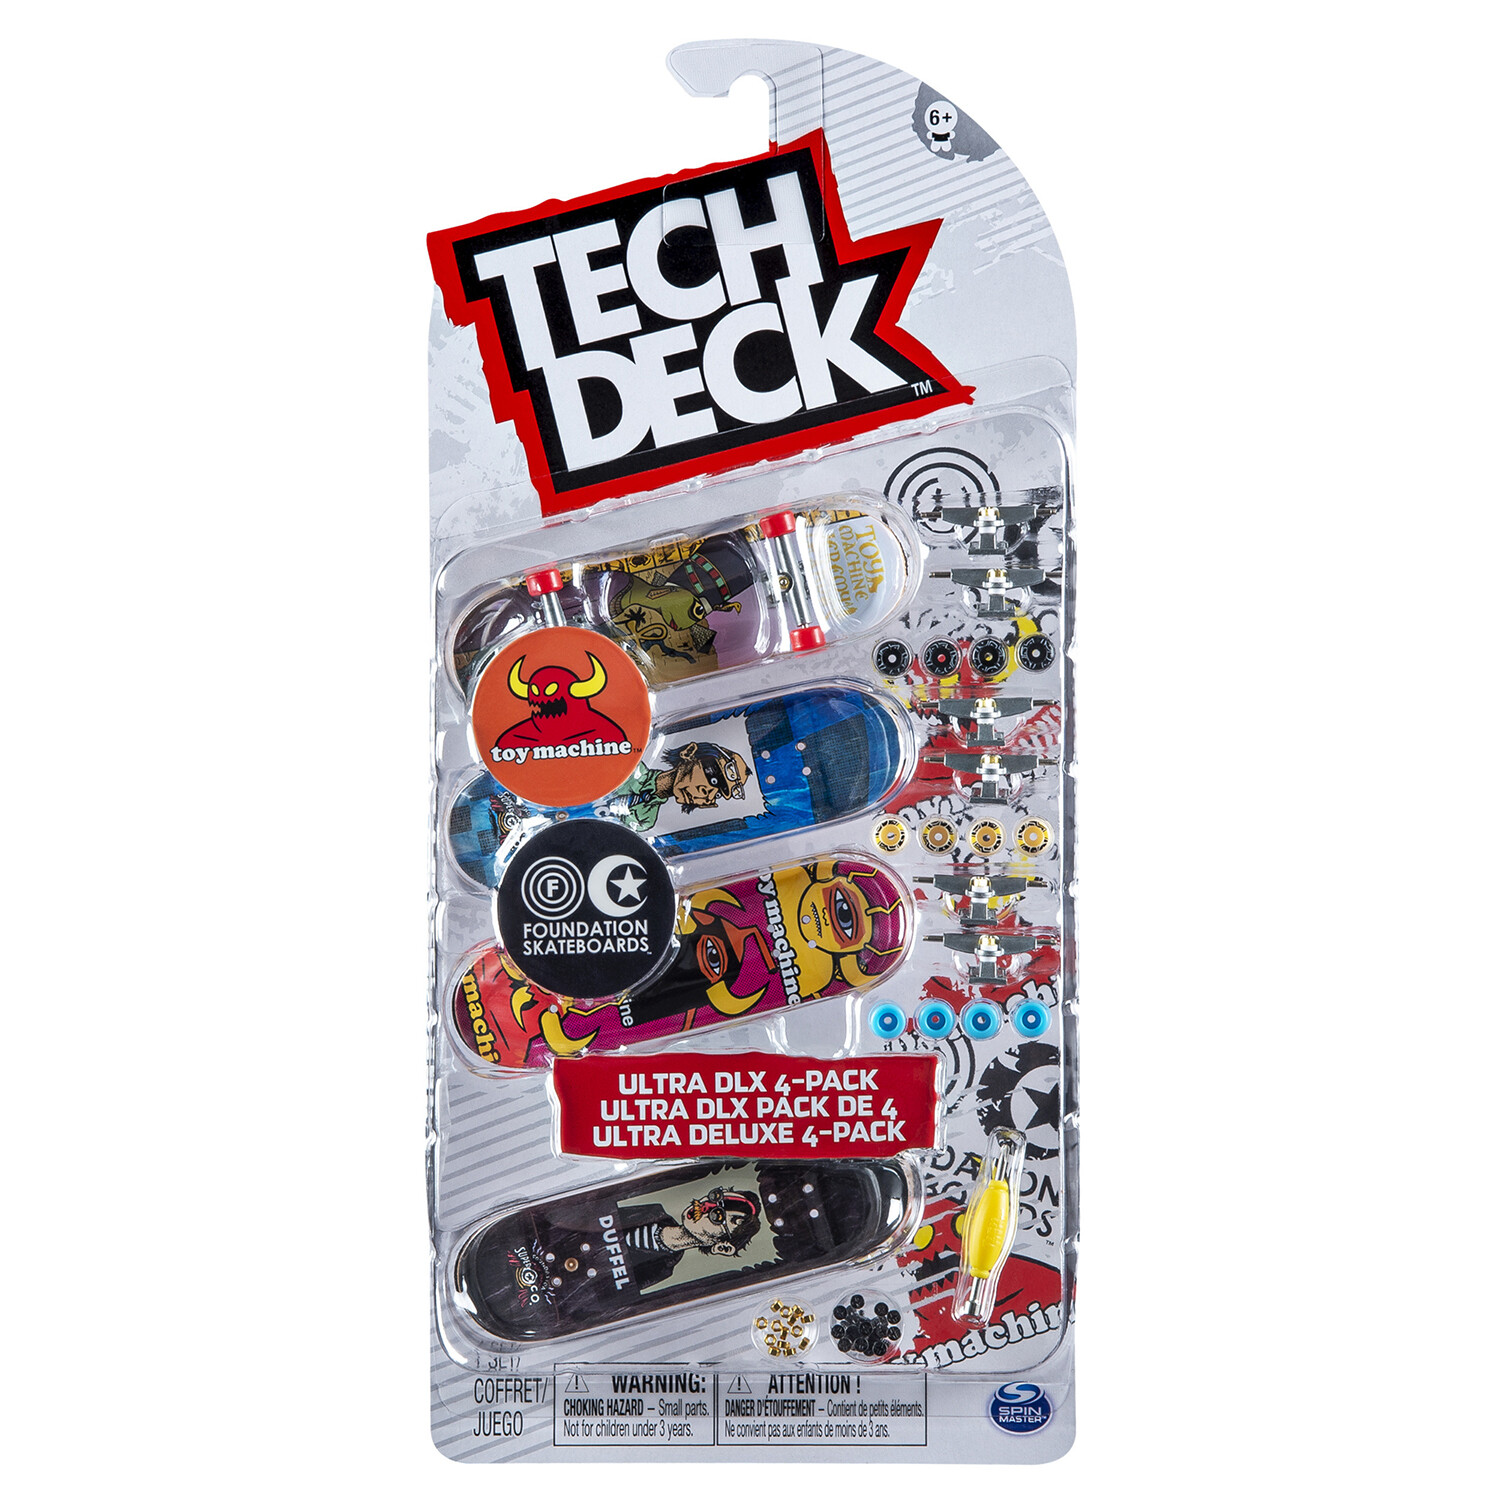 Single Tech Deck Ultra DLX Skateboards Figures 4 Pack in Assorted styles Image 5